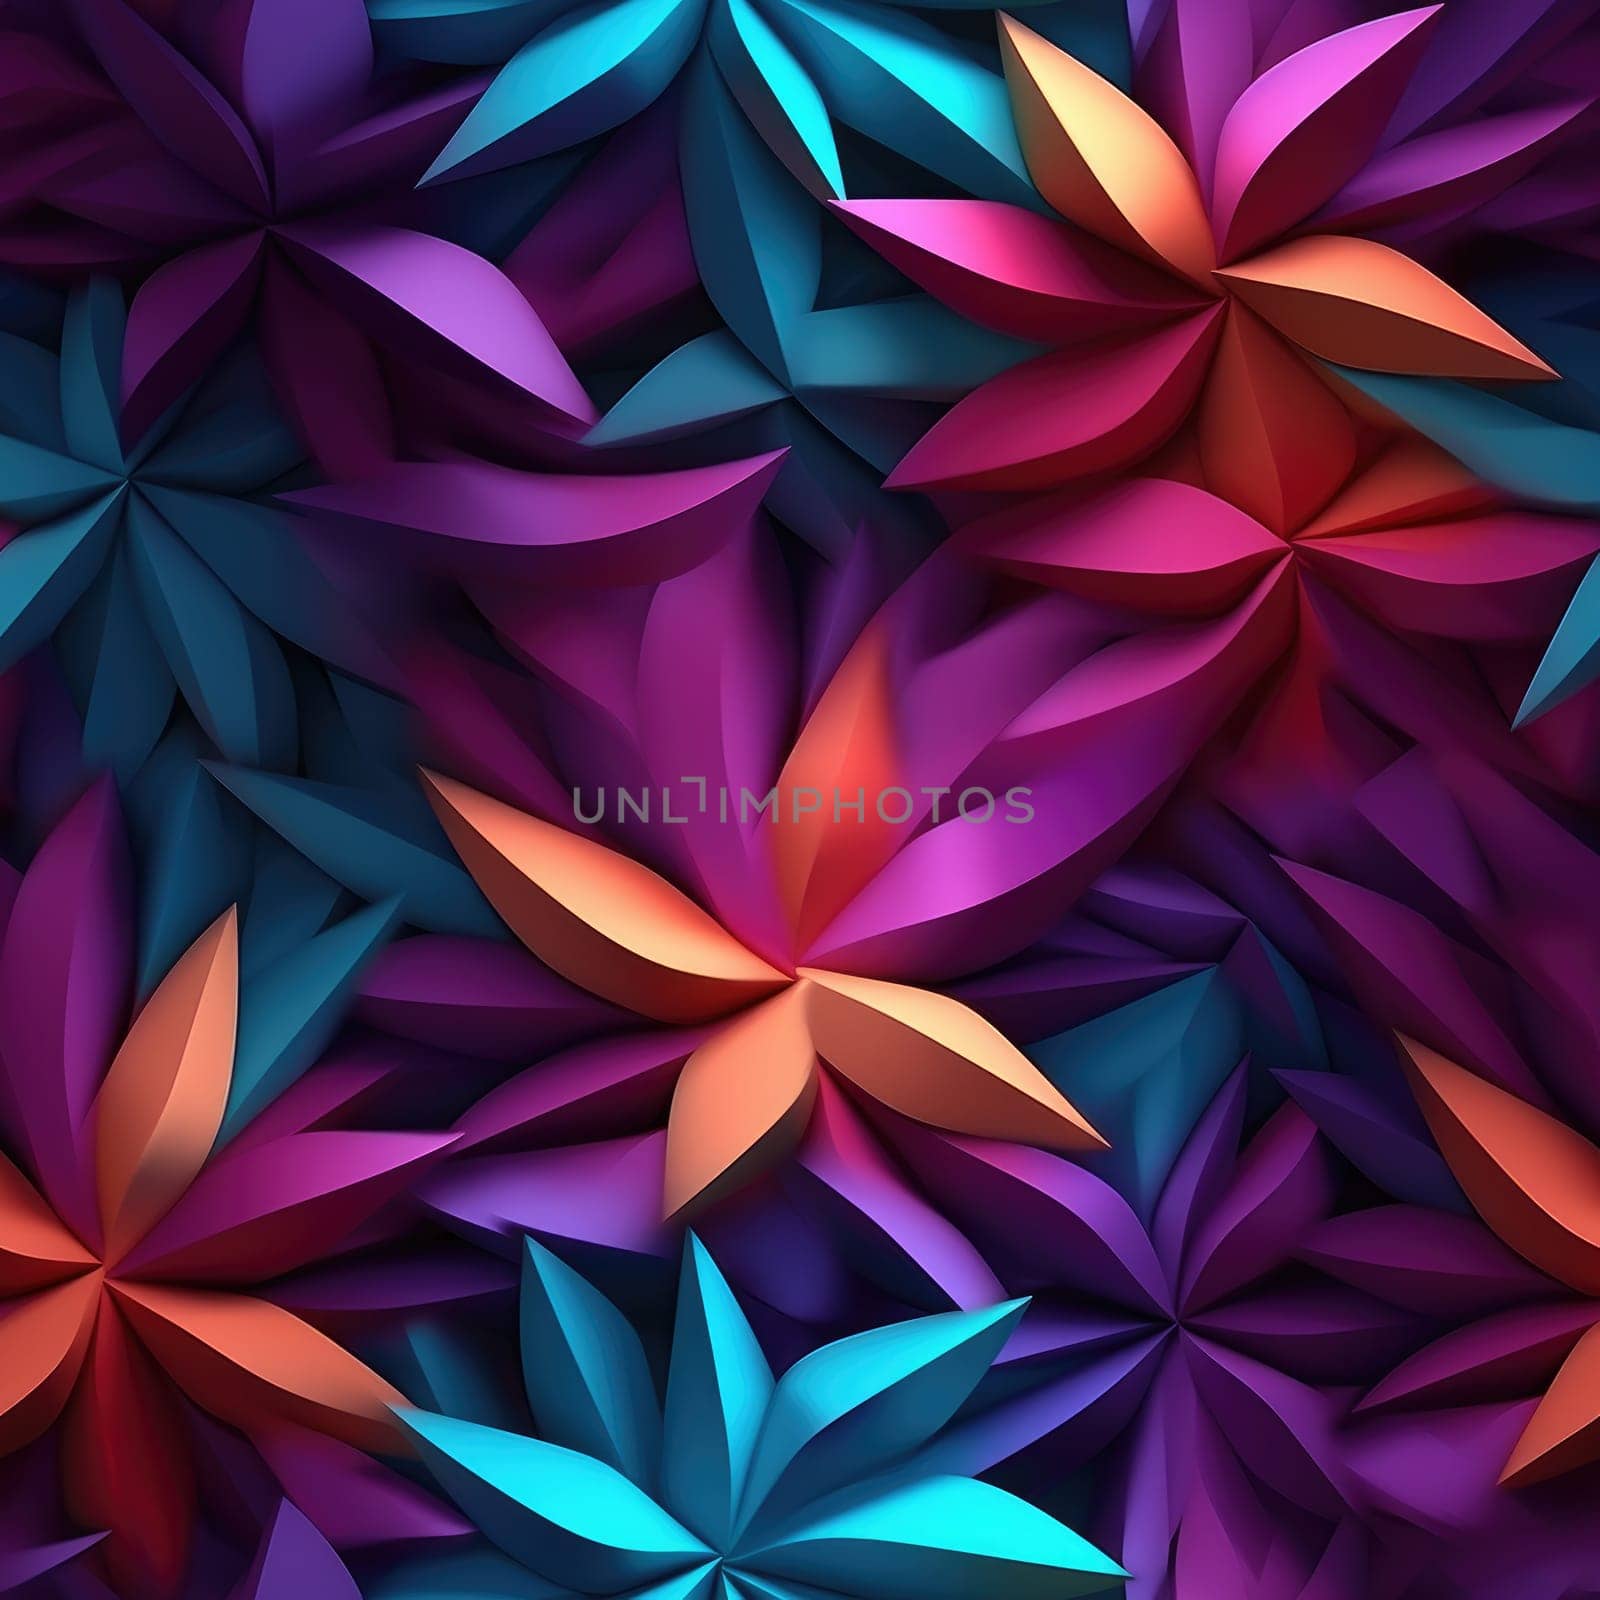 Texture consisting of flowers, 3D effect, seamless